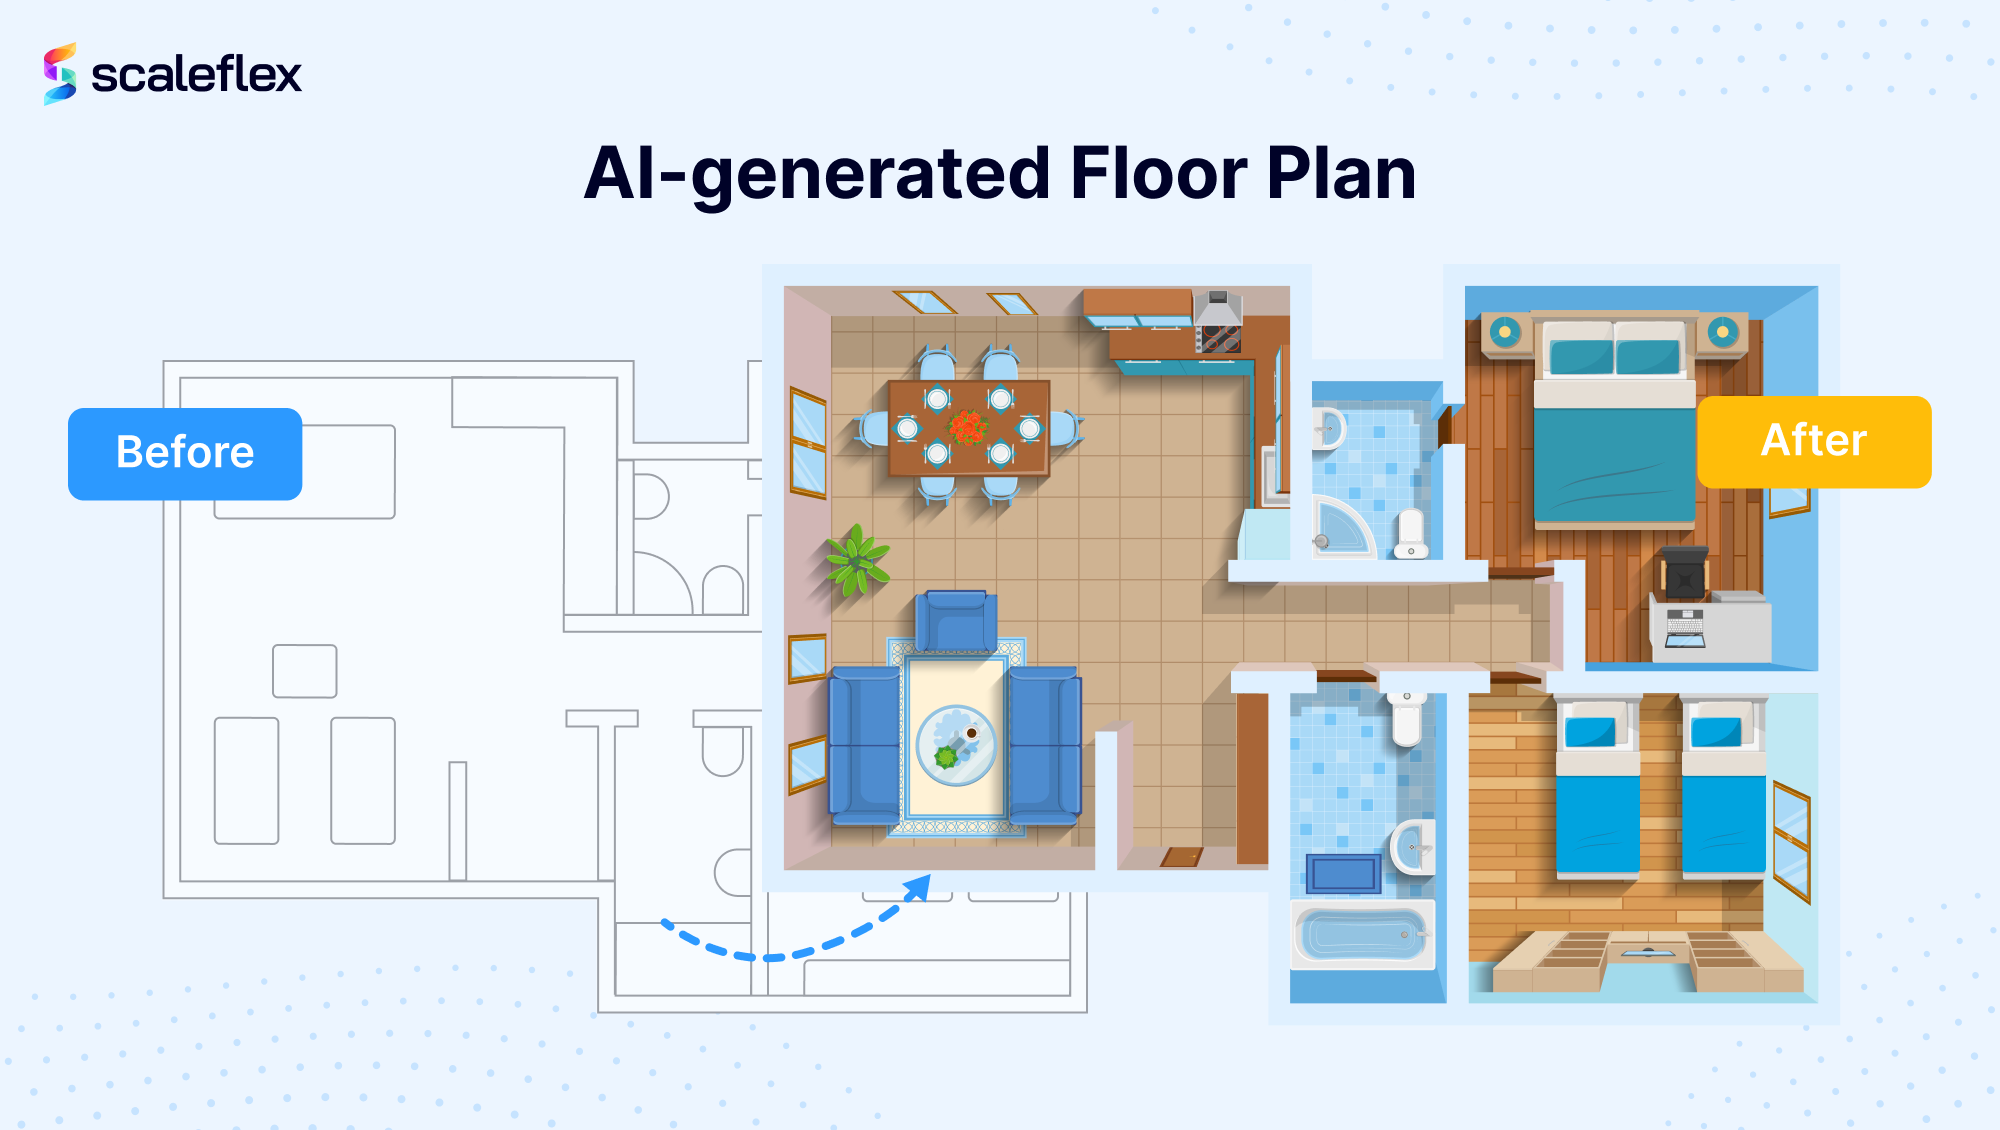 Comparison between a regular floorplan and an AI-enriched one